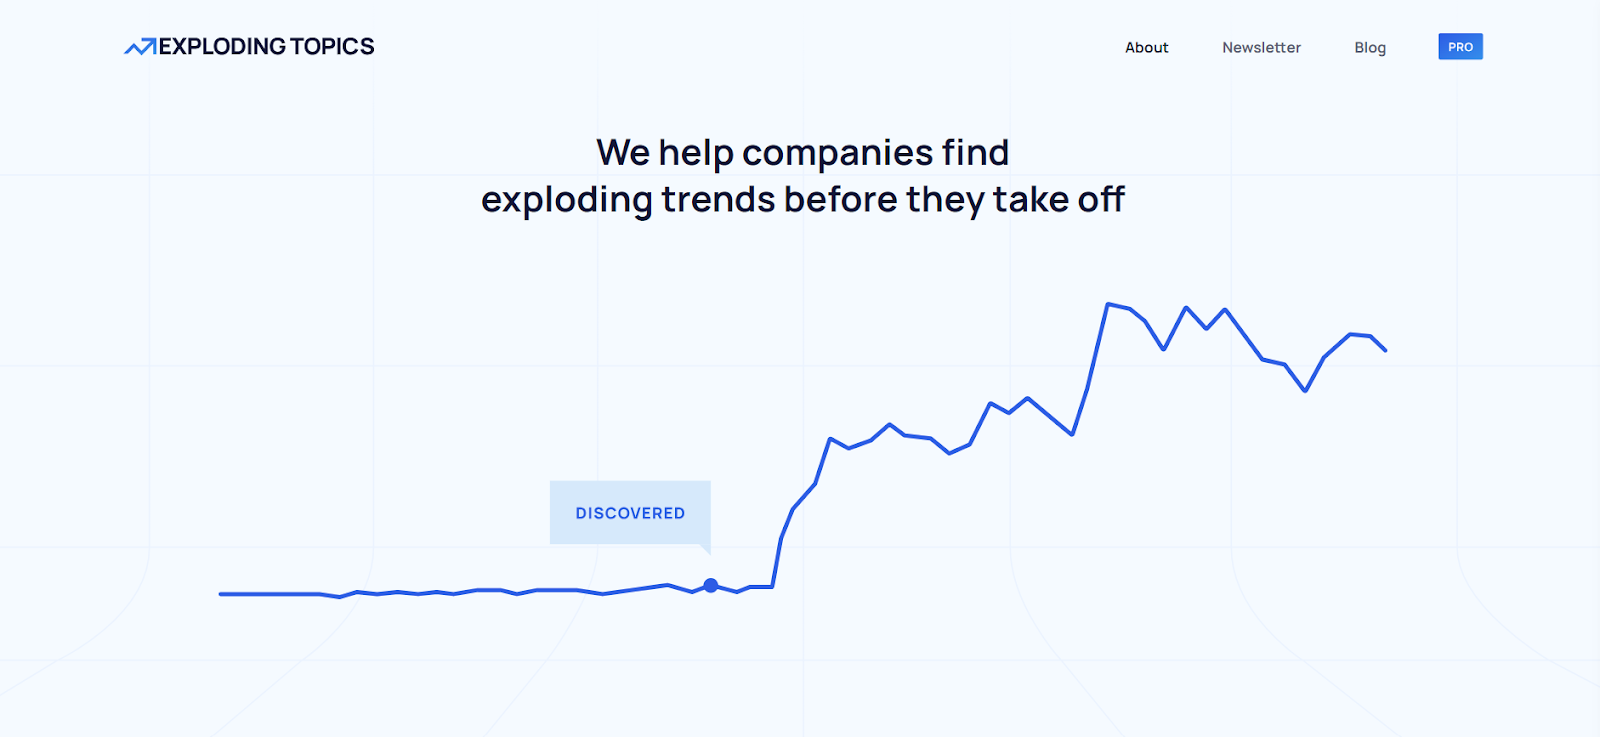 Exploding topics is a trend tracking platform that helps companies identify major emerging trends months or years before they take off. 